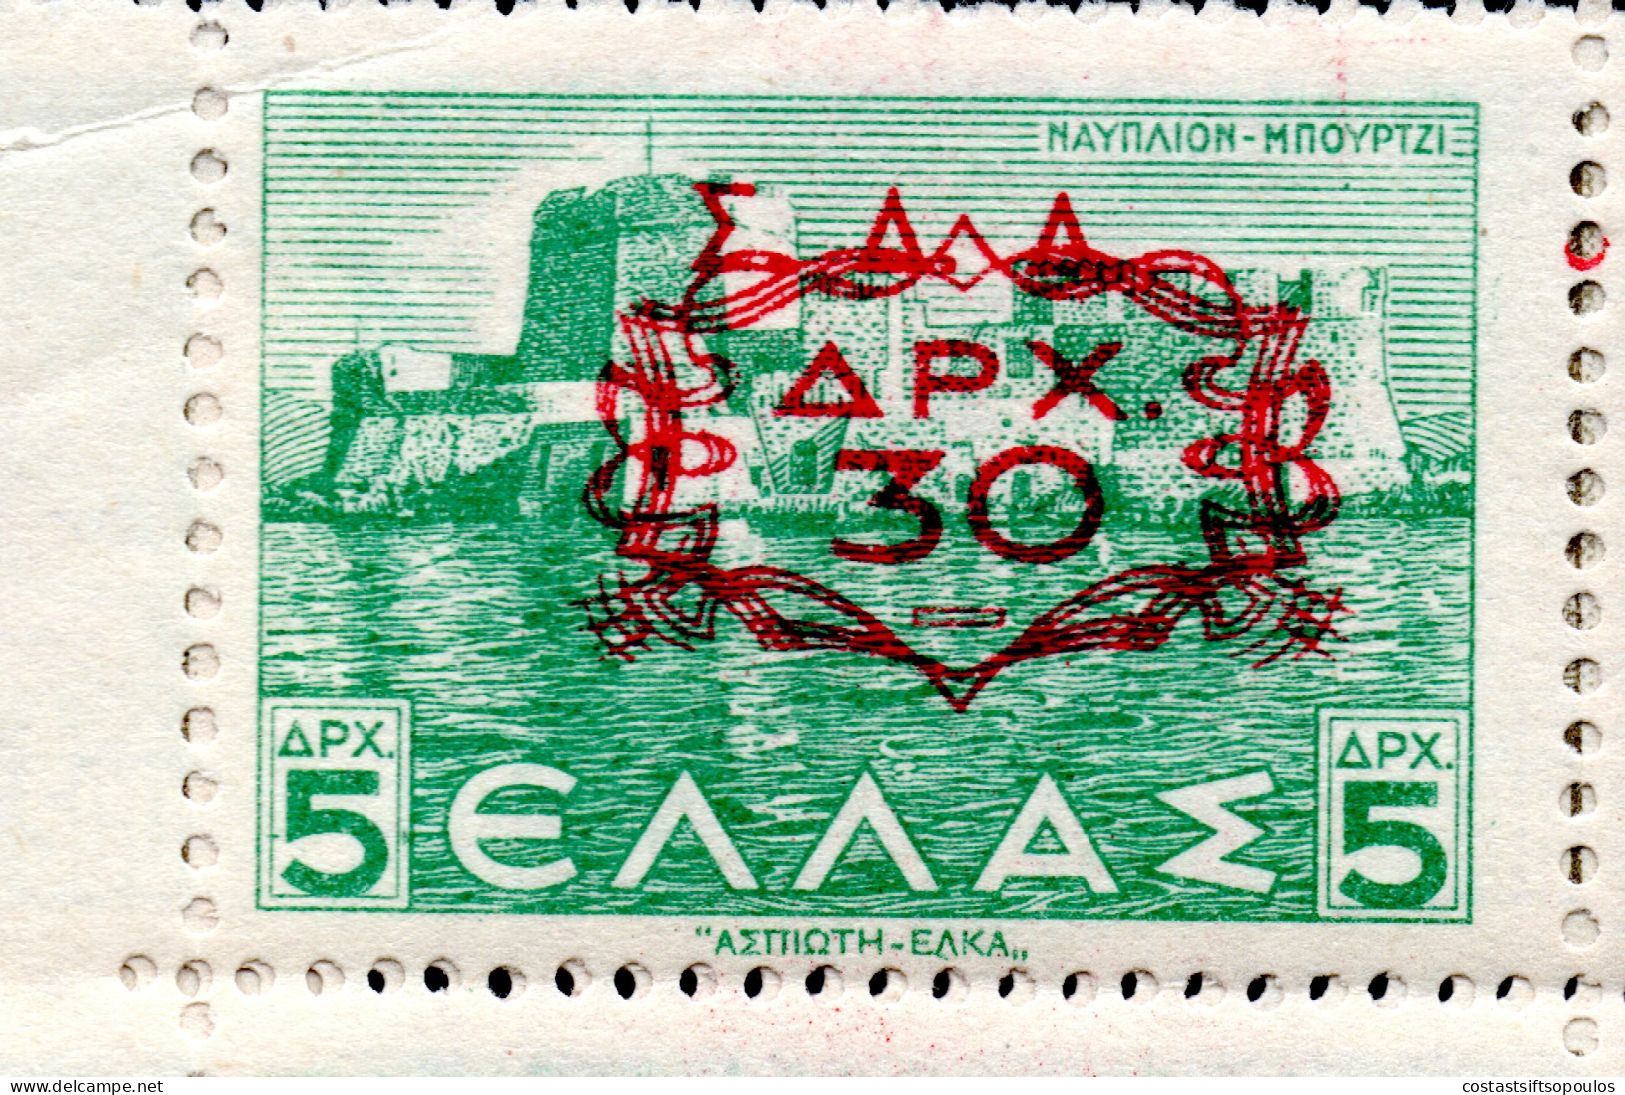 1814. GREECE, DEODECANESE 1947 Σ.Δ.Δ. #1-10 MNH BLOCKS OF 4., 1 X 30/5 DR. SMALL CREASE - Dodecanese